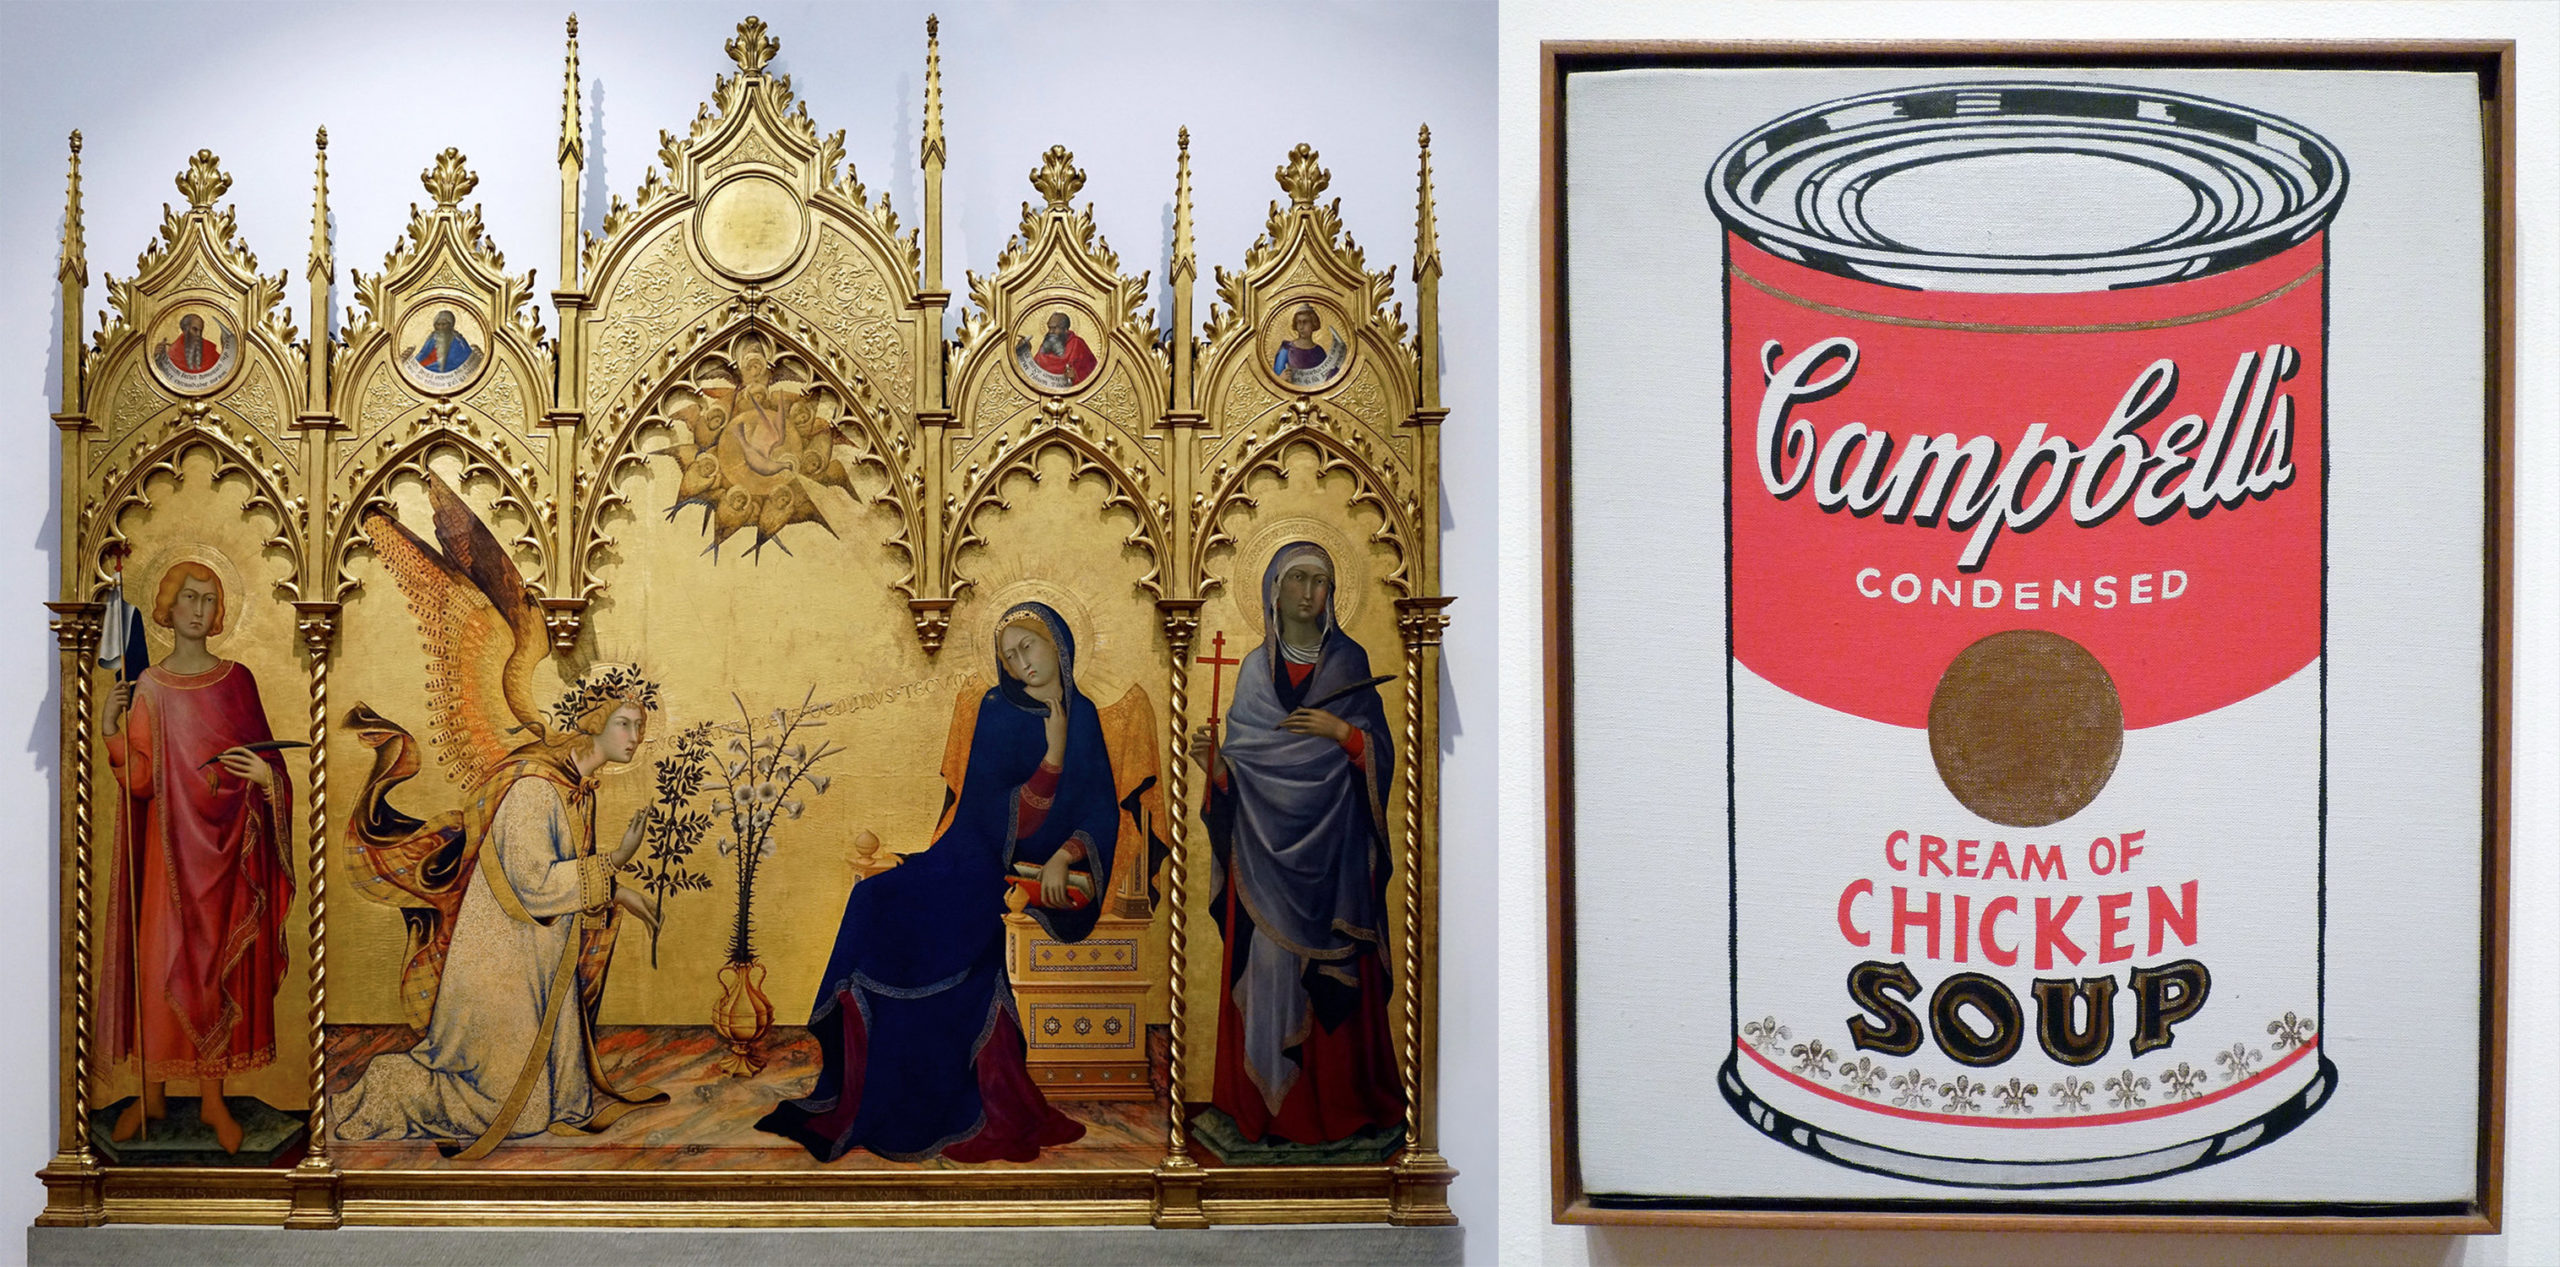 Left: Simone Martini, Annunciation, 1333, tempera on panel, 184 x 210 cm (Uffizi Gallery, Florence; photo: Steven Zucker, CC BY-NC-SA 2.0); right: soup can (detail), Andy Warhol, Campbell's Soup Cans, 1962, synthetic polymer on thirty-two canvases, each canvas 20 x 16 inches (Museum of Modern Art, New York; photo: Steven Zucker, CC BY-NC-SA 2.0)